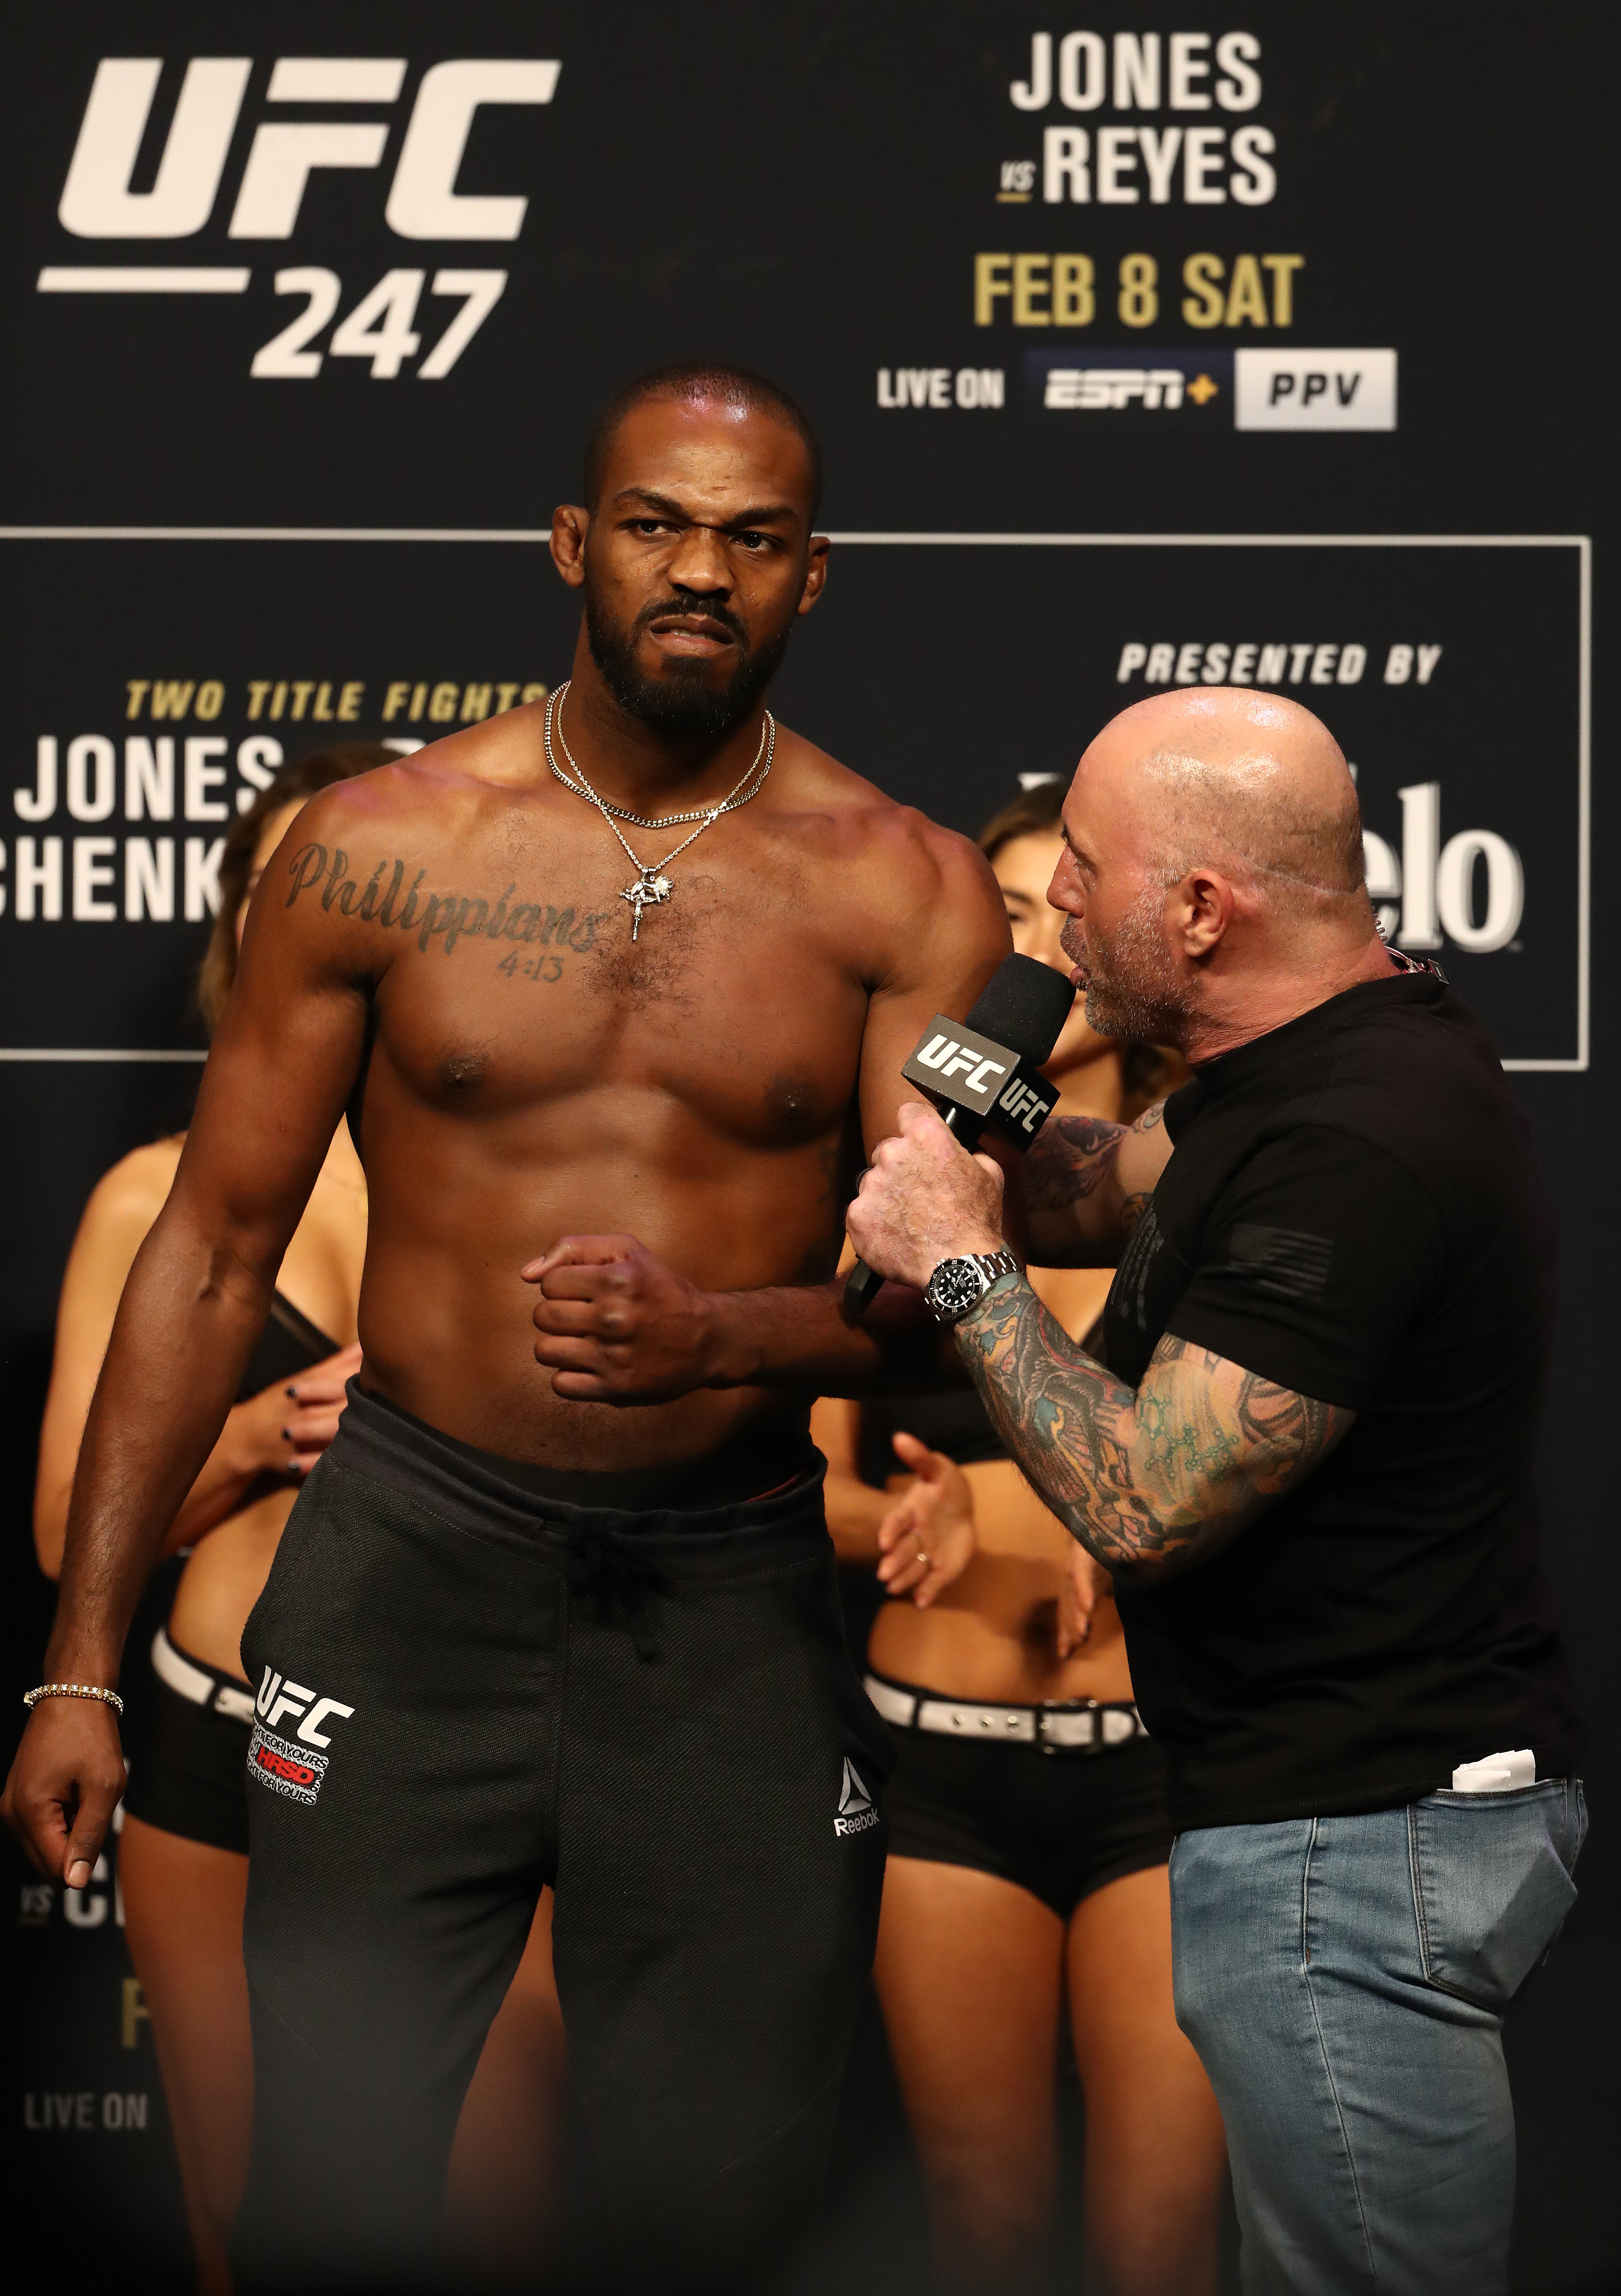 Jon Jones has opened up as a betting underdog to Ciryl Gane for their UFC 285 heavyweight title fight